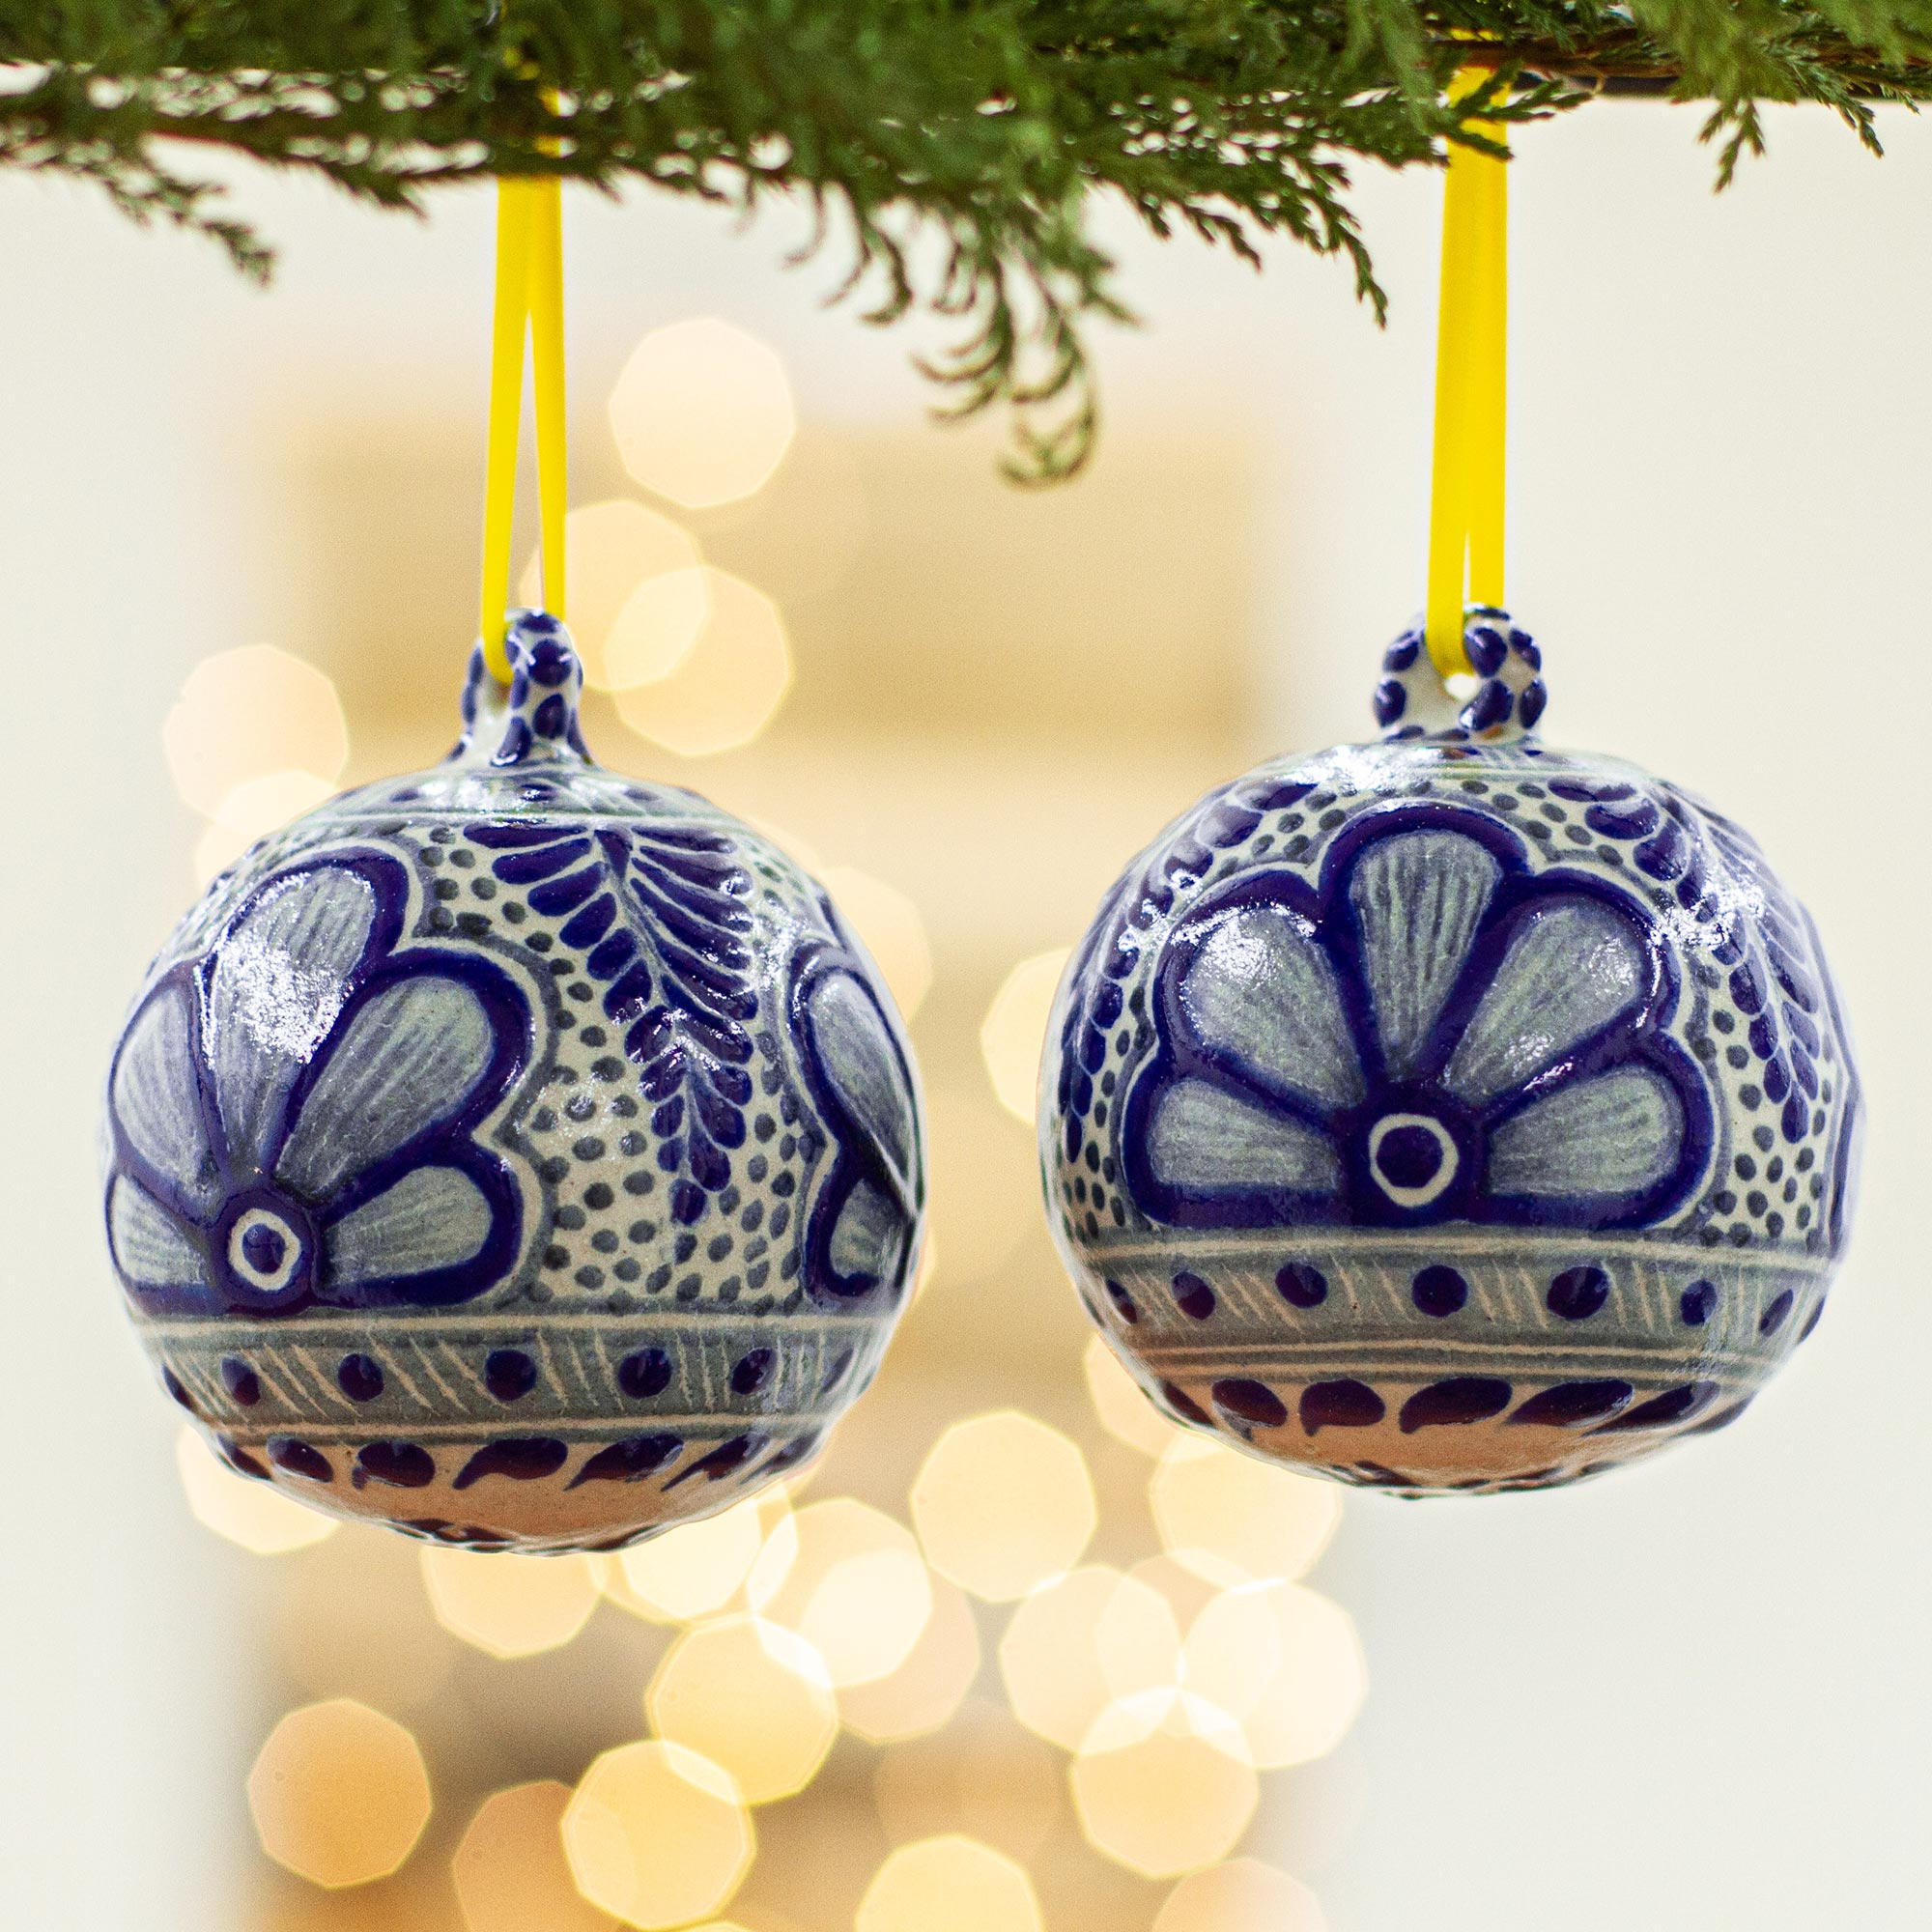 Table Decoration or a Wreath 11 Blown Glass Hand Painted Blue Mexican Talavera Like Christmas Ornament Balls/ Made by marginalized Communities/ Useful for a Christmas Tree 